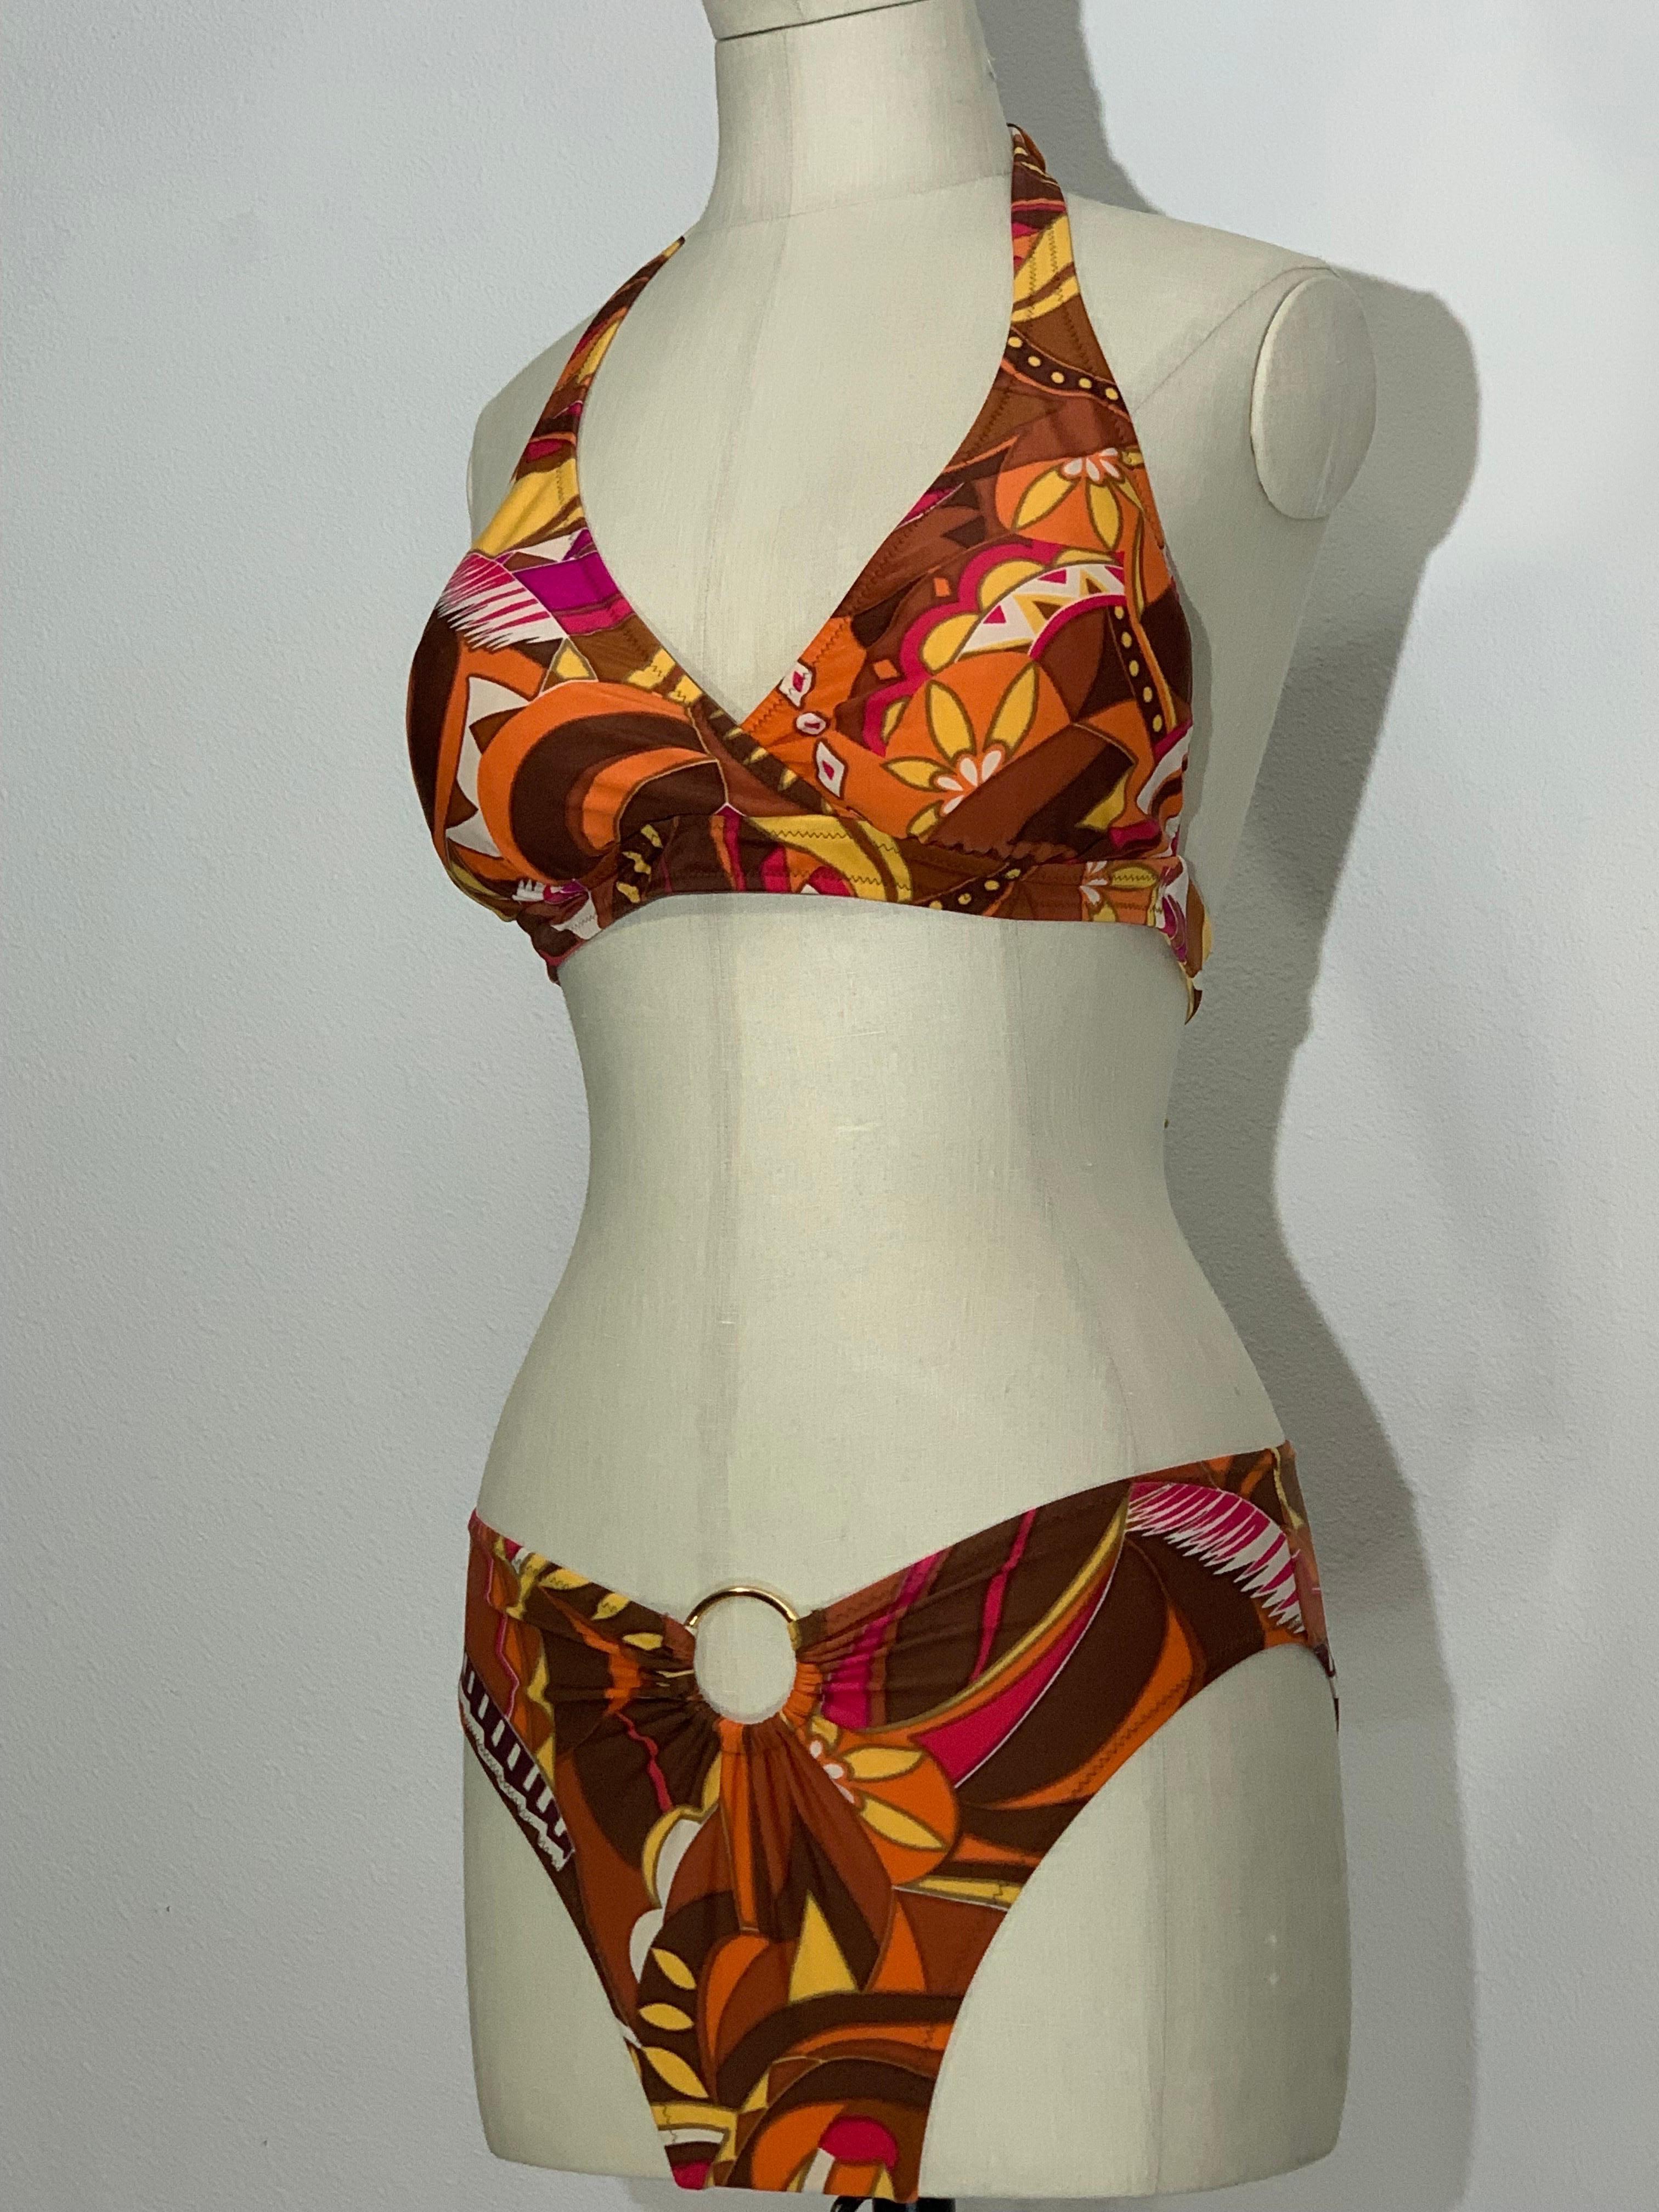 1970s Gottex Stylized Floral 2-Piece Bikini Swimsuit in Brown Copper and Orange: High-cut leg with center gold ring on bottoms. Wrap front, halter neck top with tie at neck and back. New, never worn. US size 8